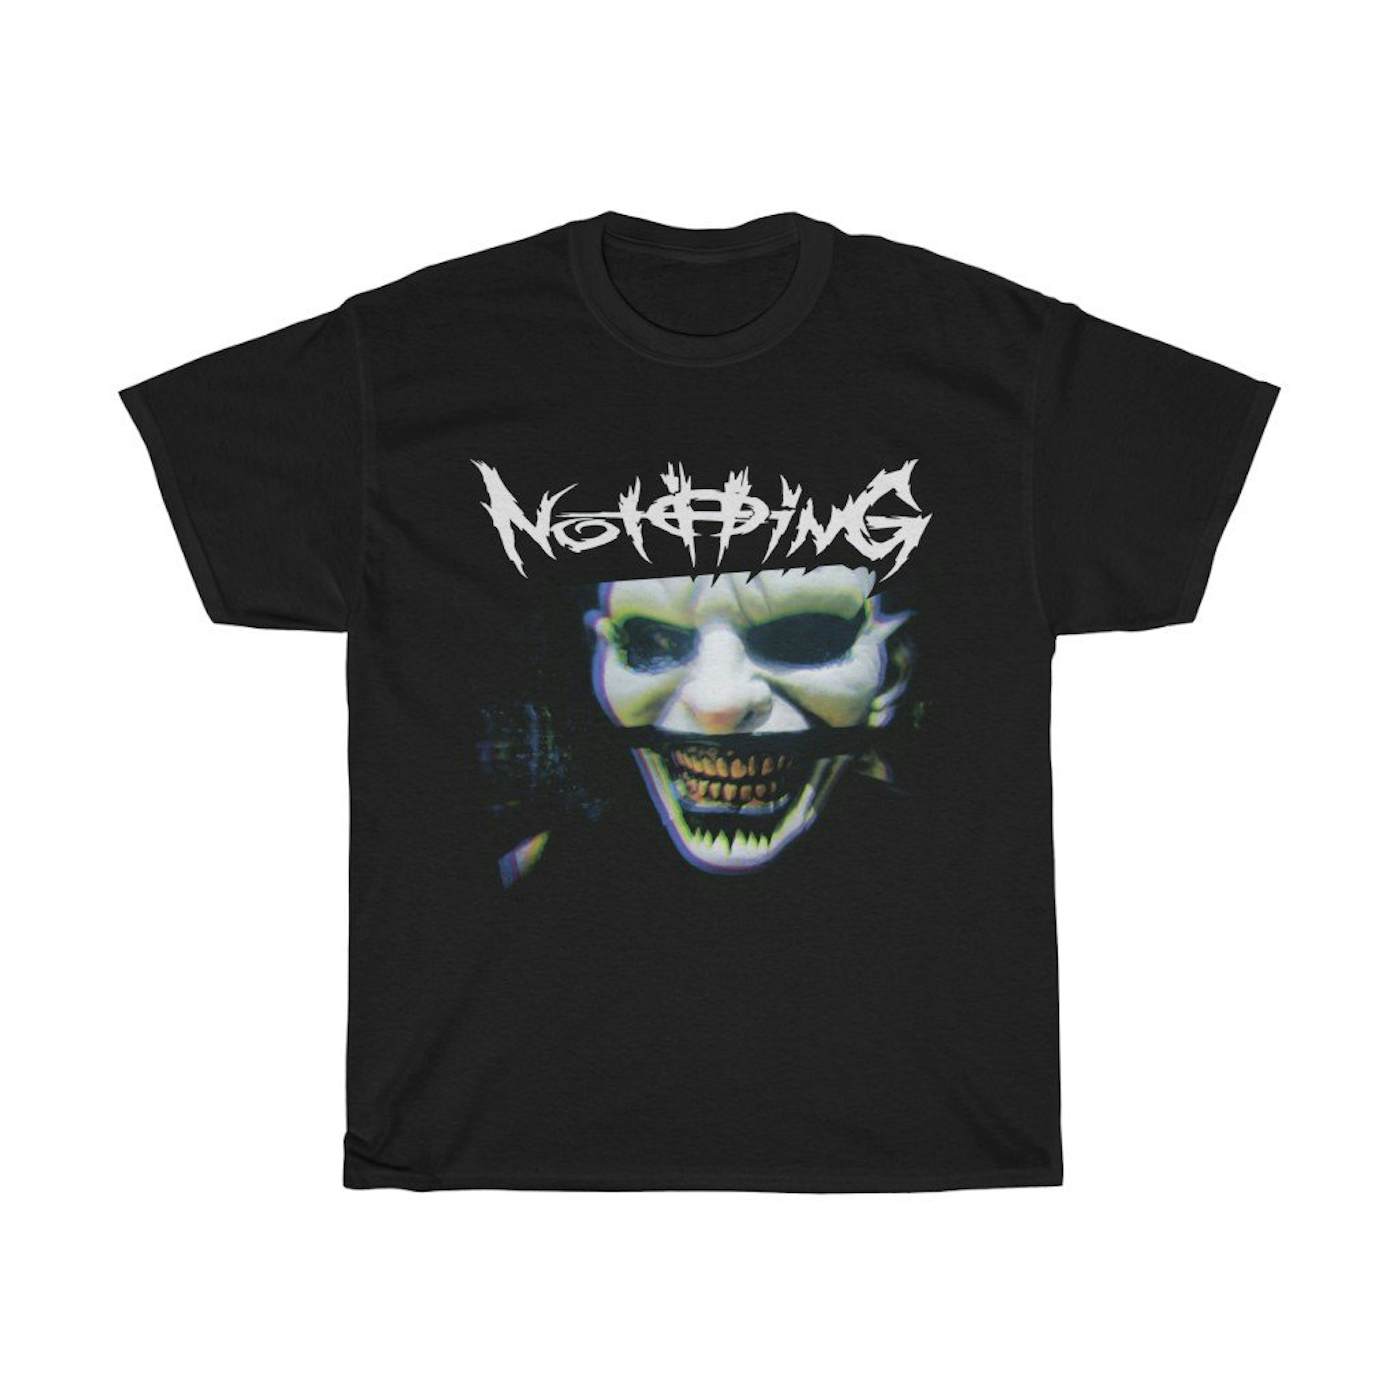 Jeffrey Nothing - Distorted Face Tee